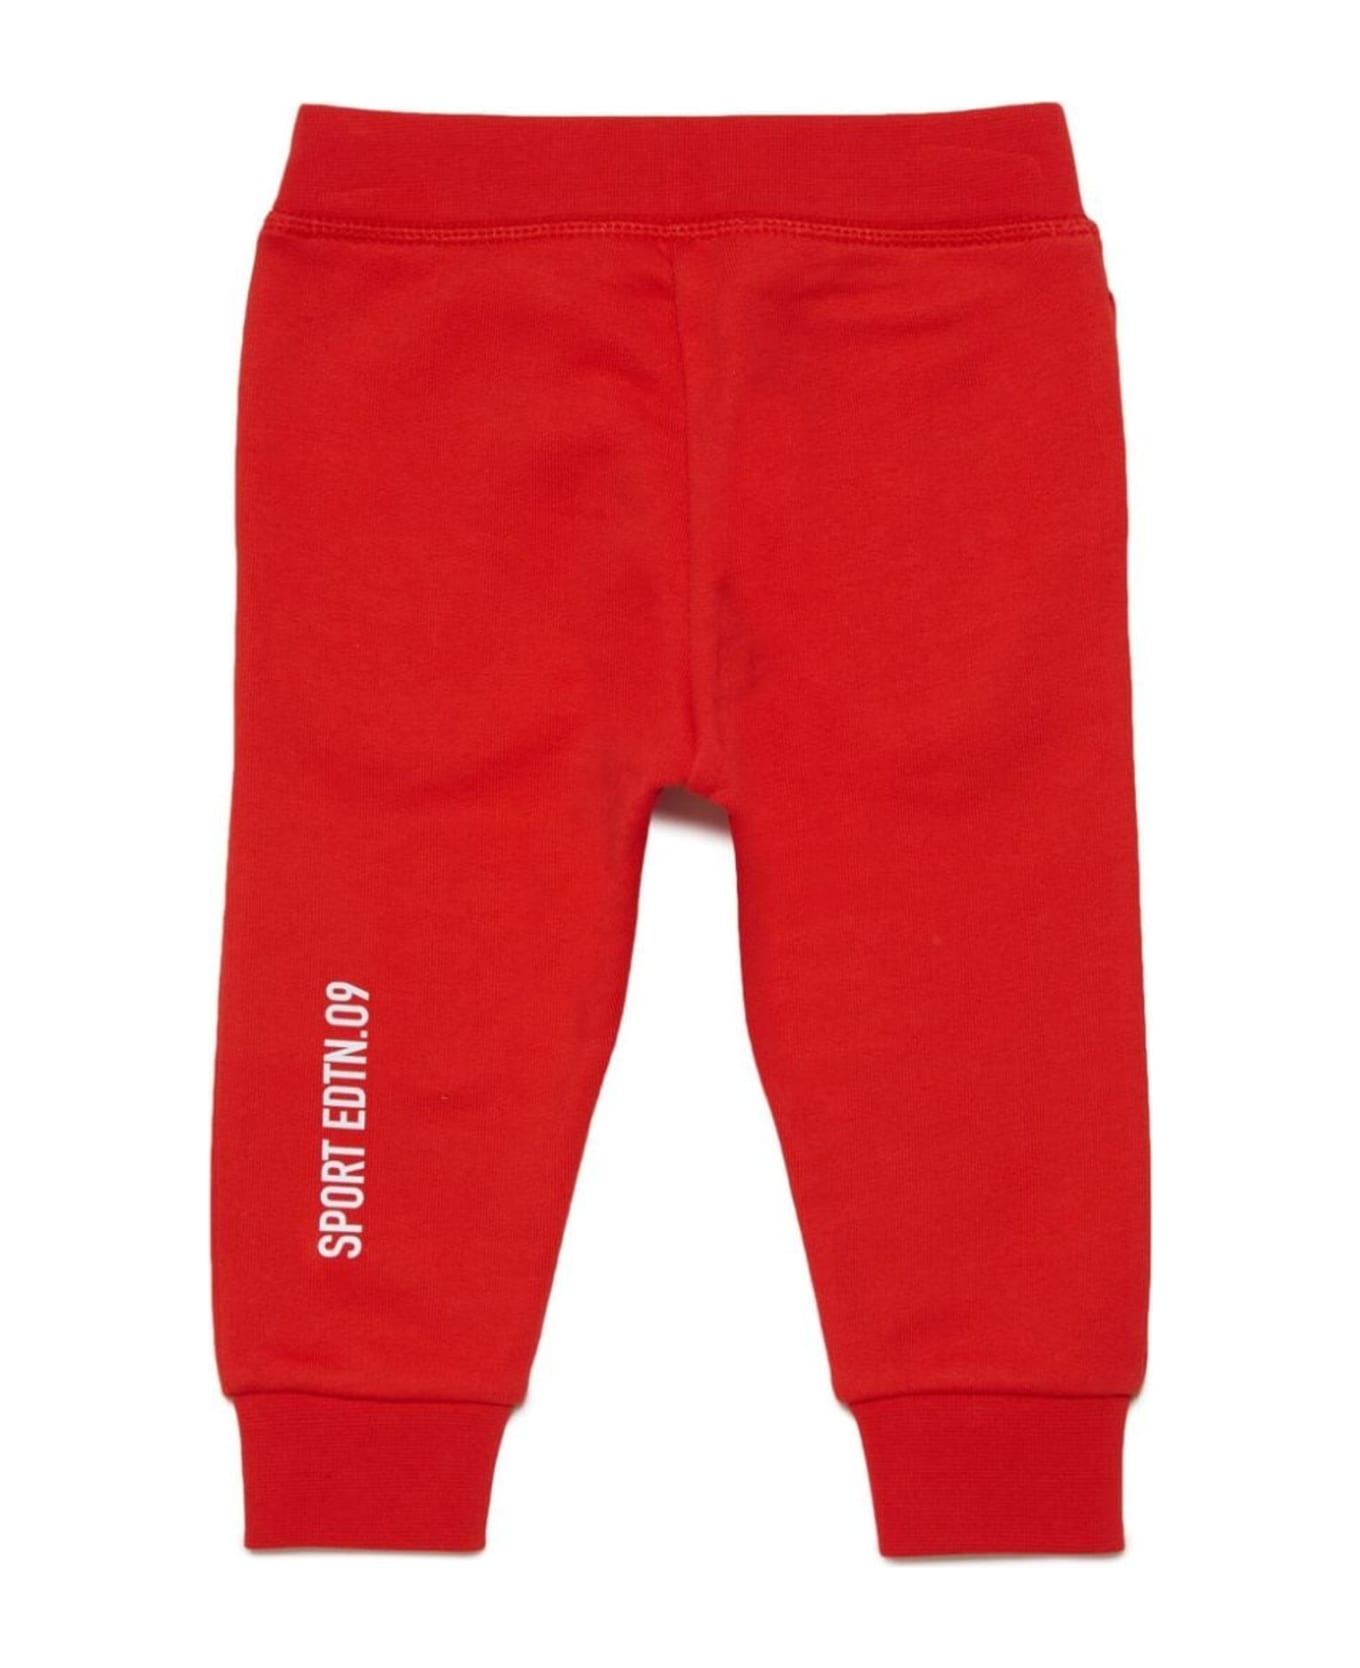 Dsquared2 Trousers Red - Red